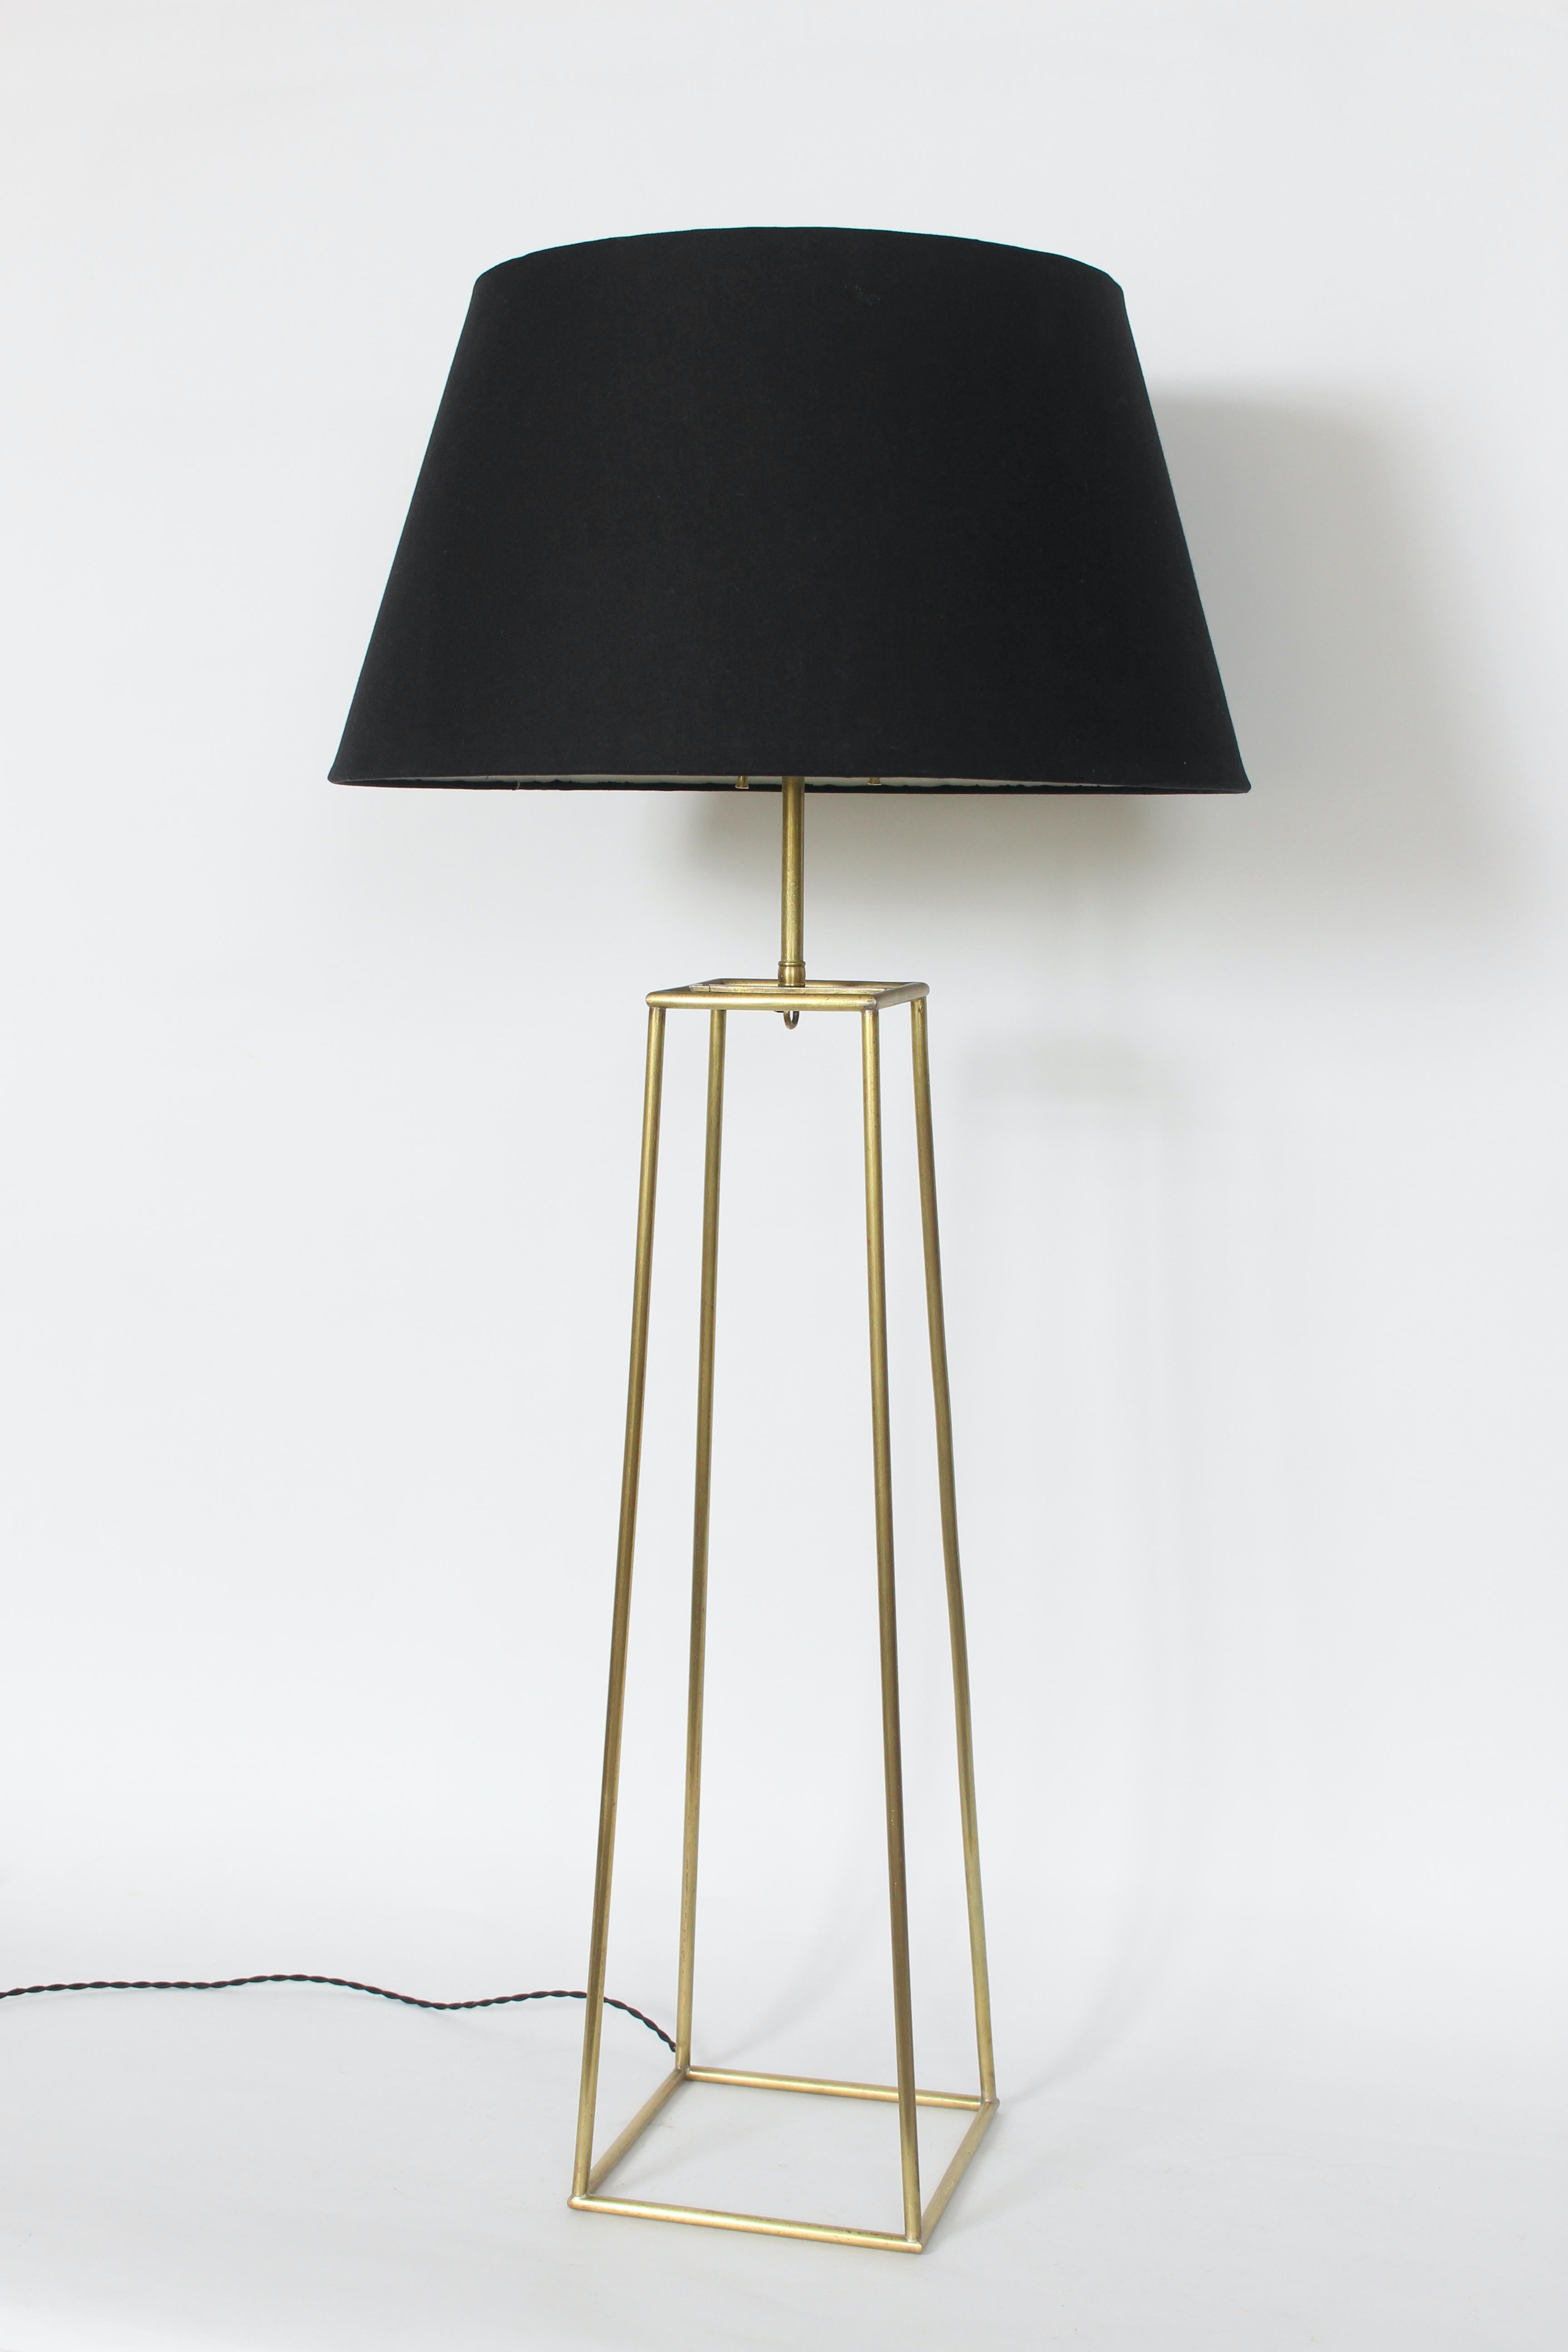 American Substantial Tommi Parzinger Style Brass Open Box Form Table Lamp, 1950s For Sale